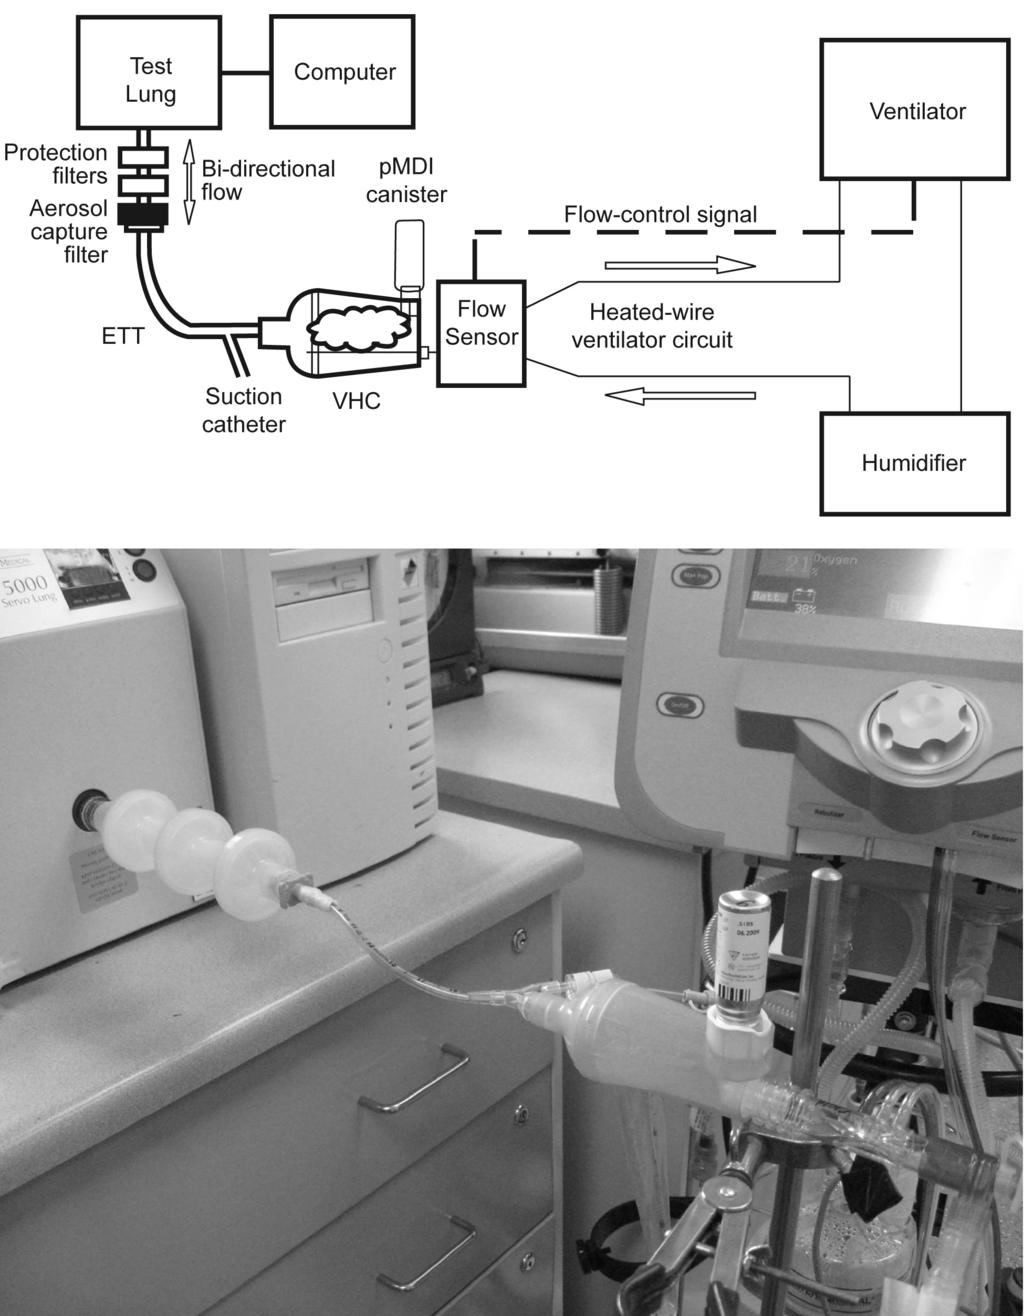 A NOVEL, VERSATILE VALVED HOLDING CHAMBER Fig. 2. Simulated aerosol delivery with the AeroChamber Mini valved holding chamber (VHC) during mechanical ventilation. A: Schematic.